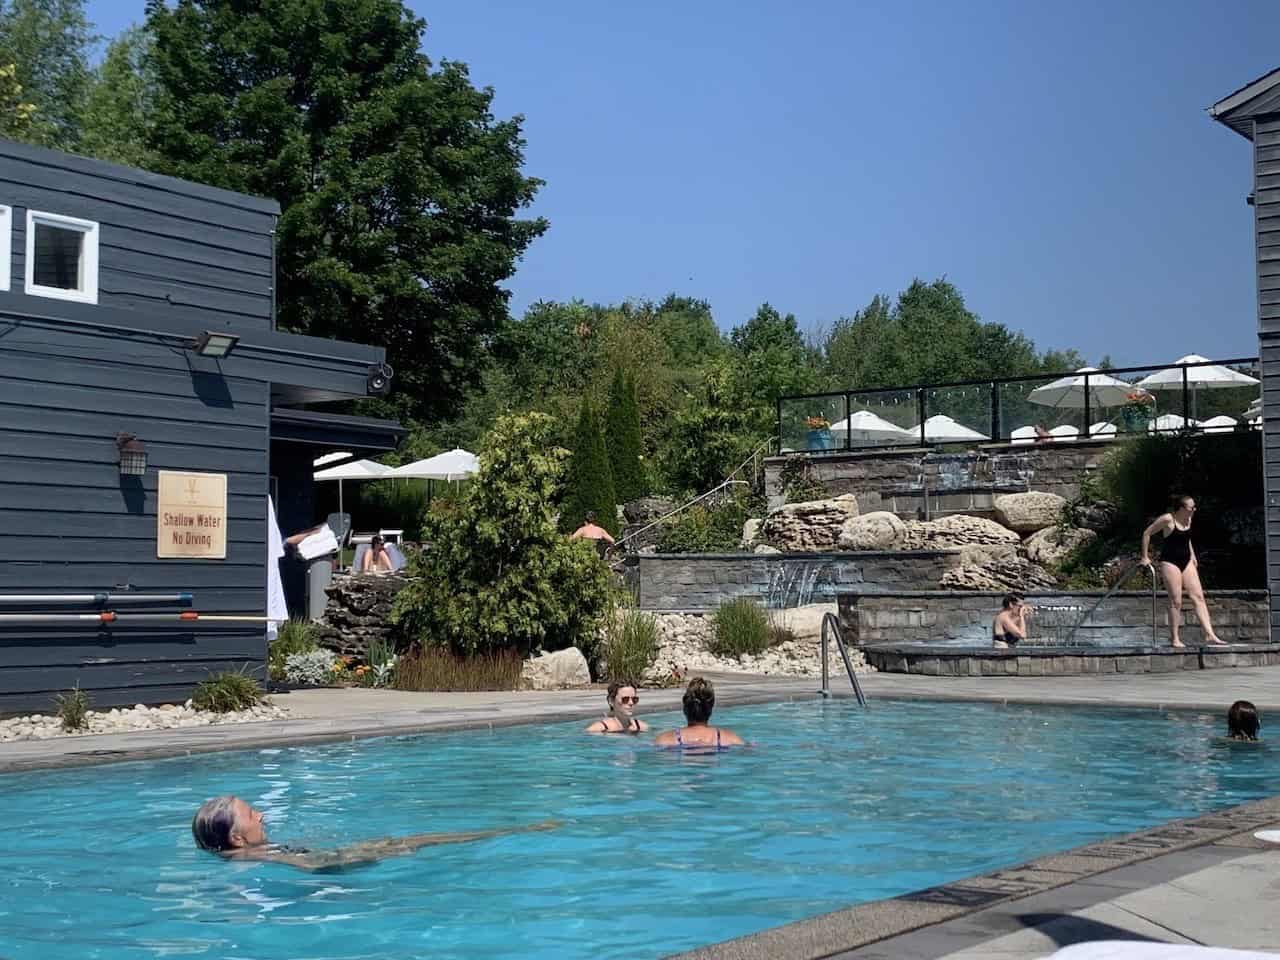 Outdoor Heated Pool at Millcroft Inn and Spa Alton Ontario Canada - The outdoor heated pool at Millcroft Inn and Spa is open all year around for guests to enjoy. The lounge chairs and umbrellas along the sides of the pool are a popular sitting spot for guests.